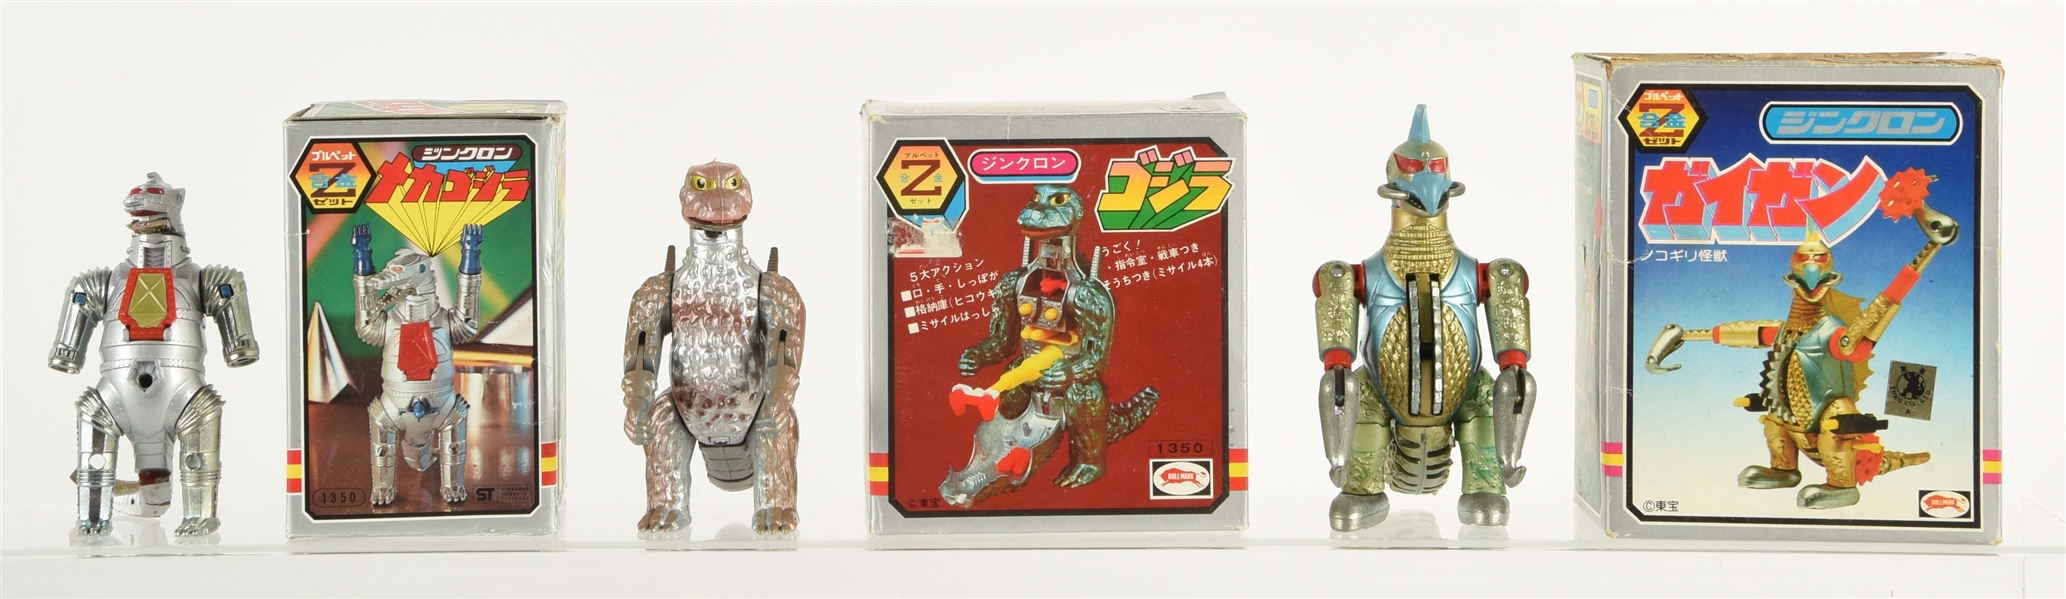 LOT OF 3: JAPANESE 1970S BULLMARK DIE-CAST CHARACTER FIGURES IN BOXES. 